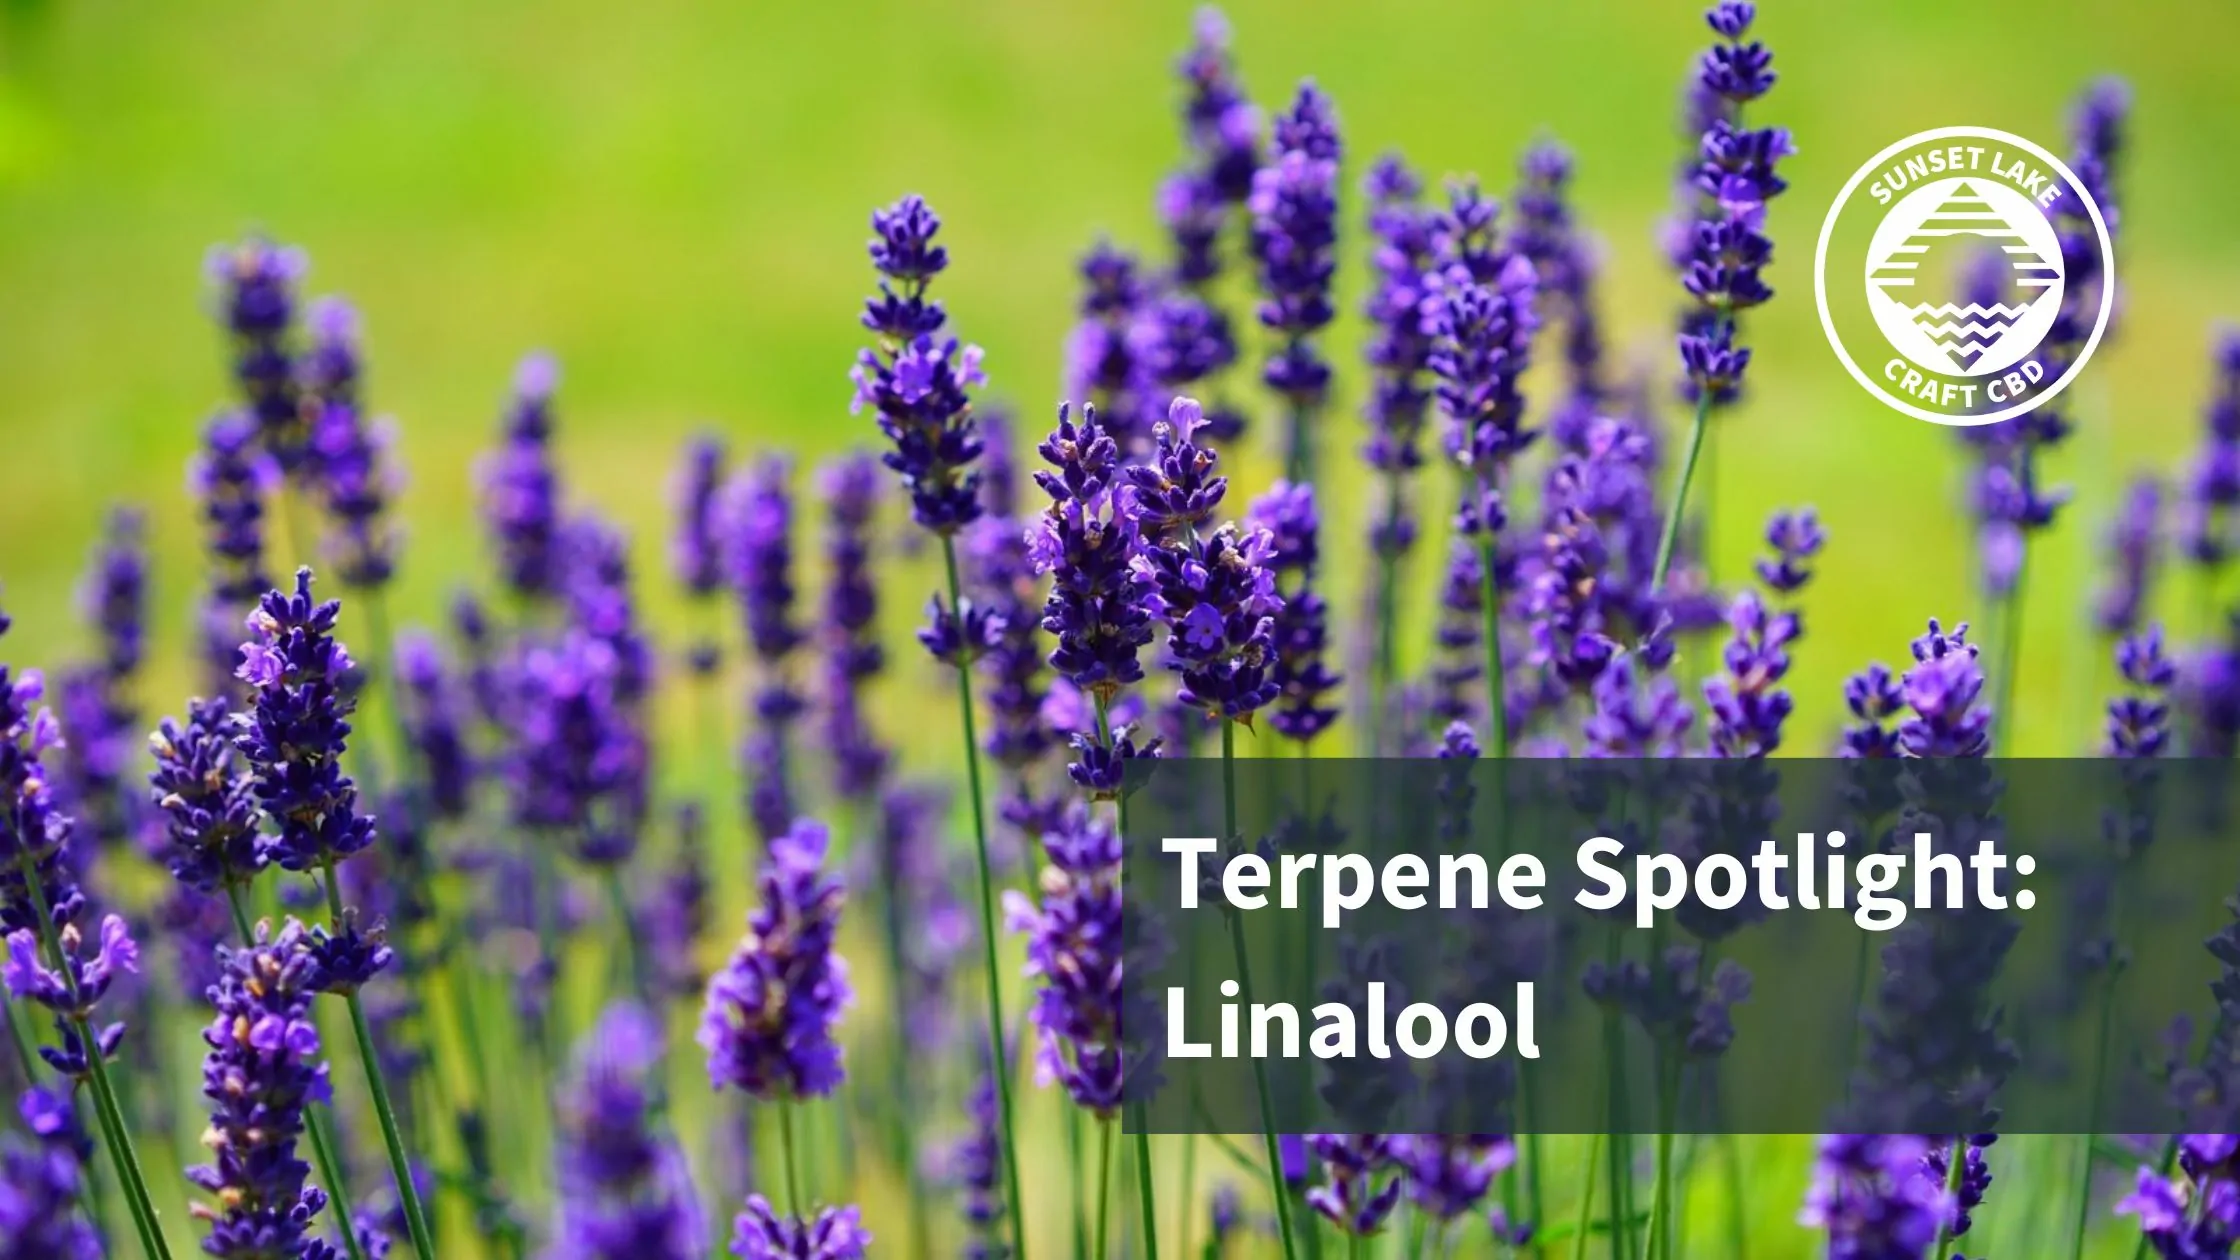 A field of lavender with the text "Terpene Spotlight: Linalool" overlaid